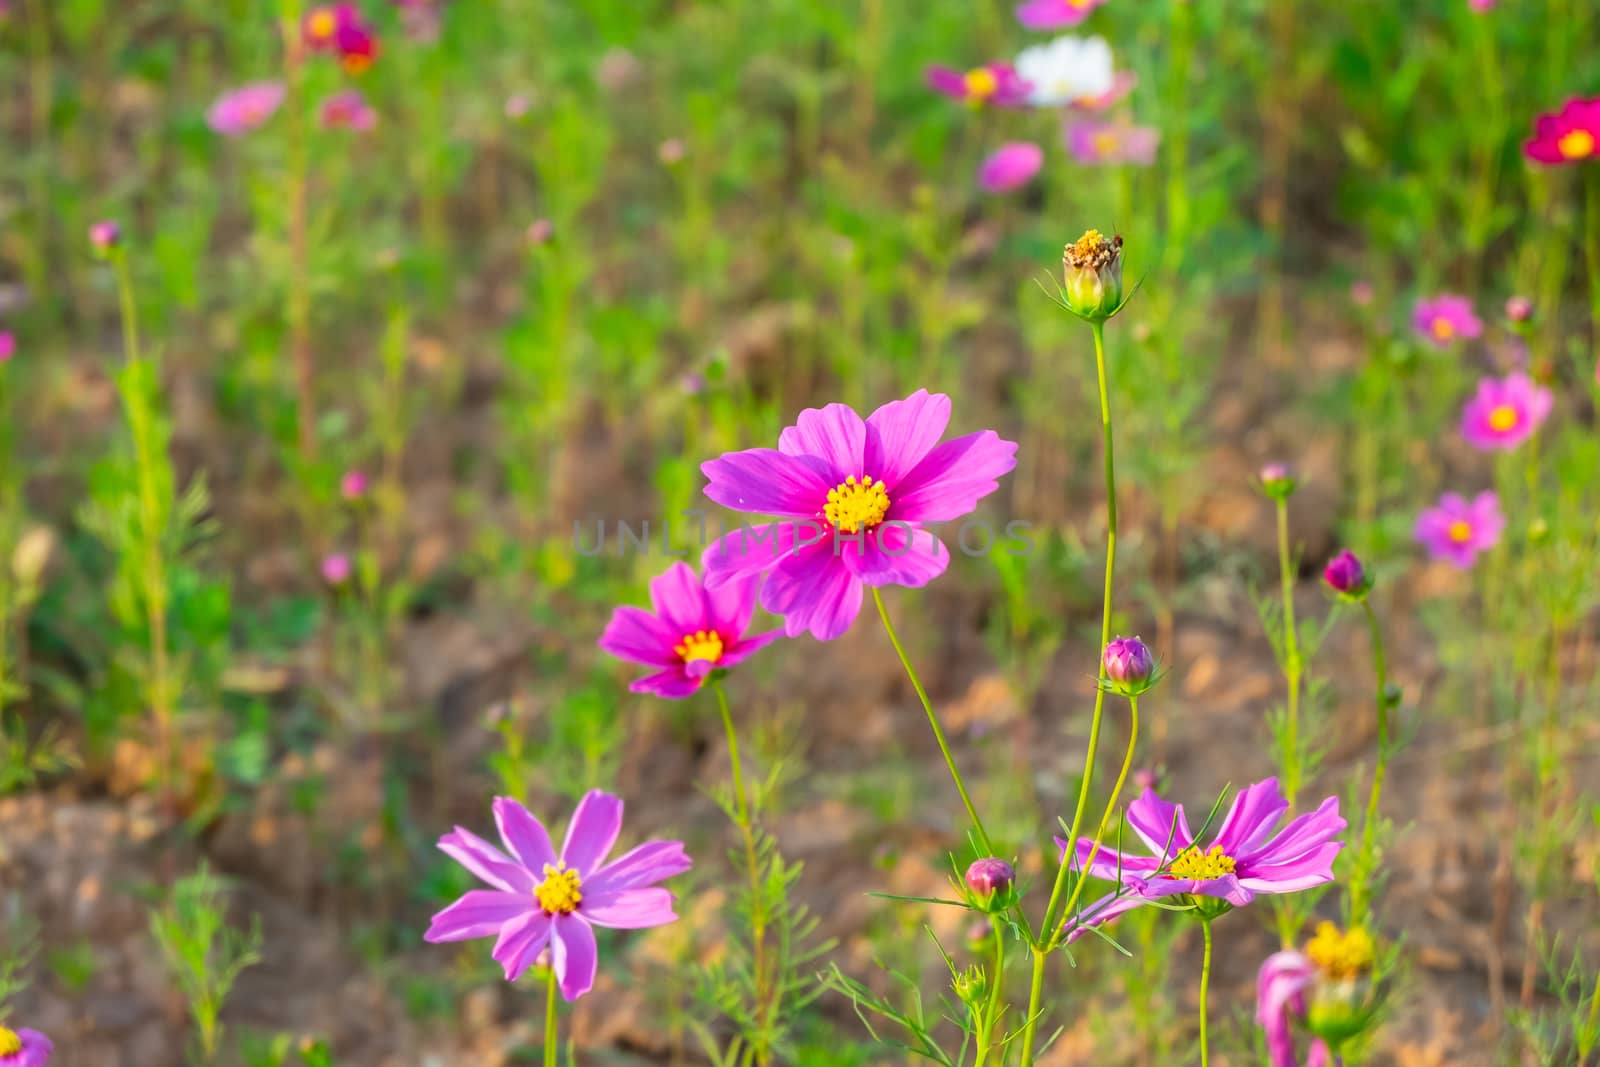 cosmos flowers in the farm